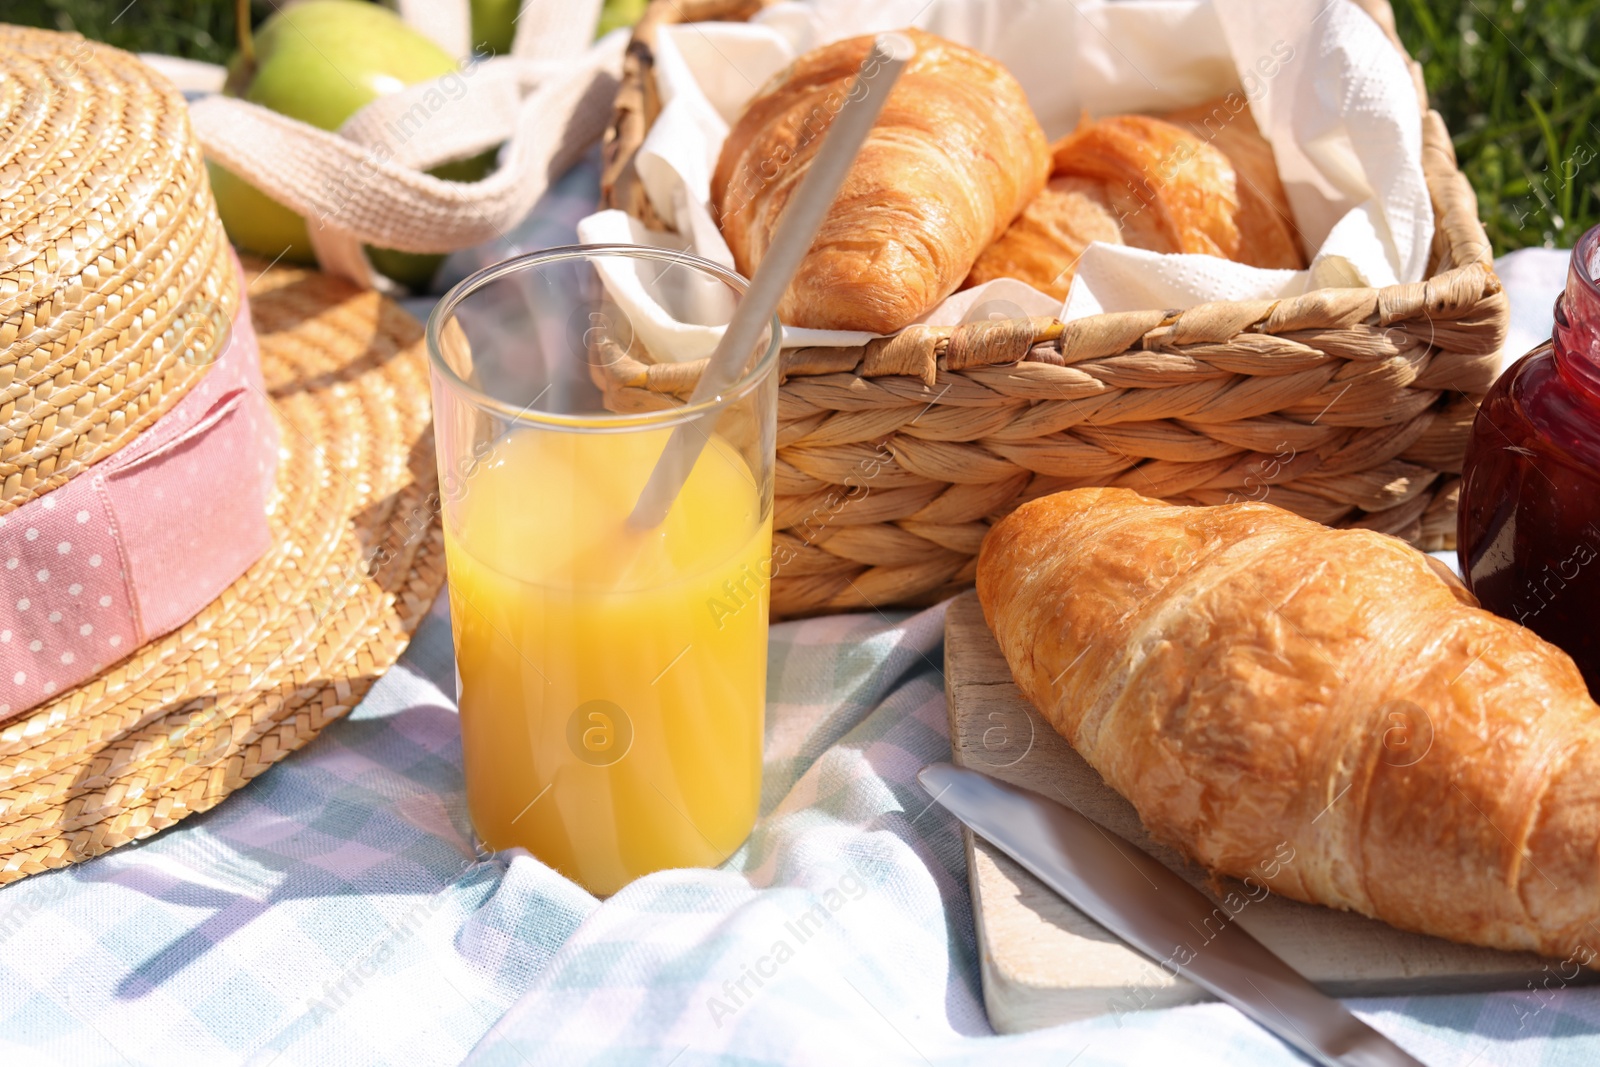 Photo of Blanket with juice, jam and croissants for picnic on green grass, closeup